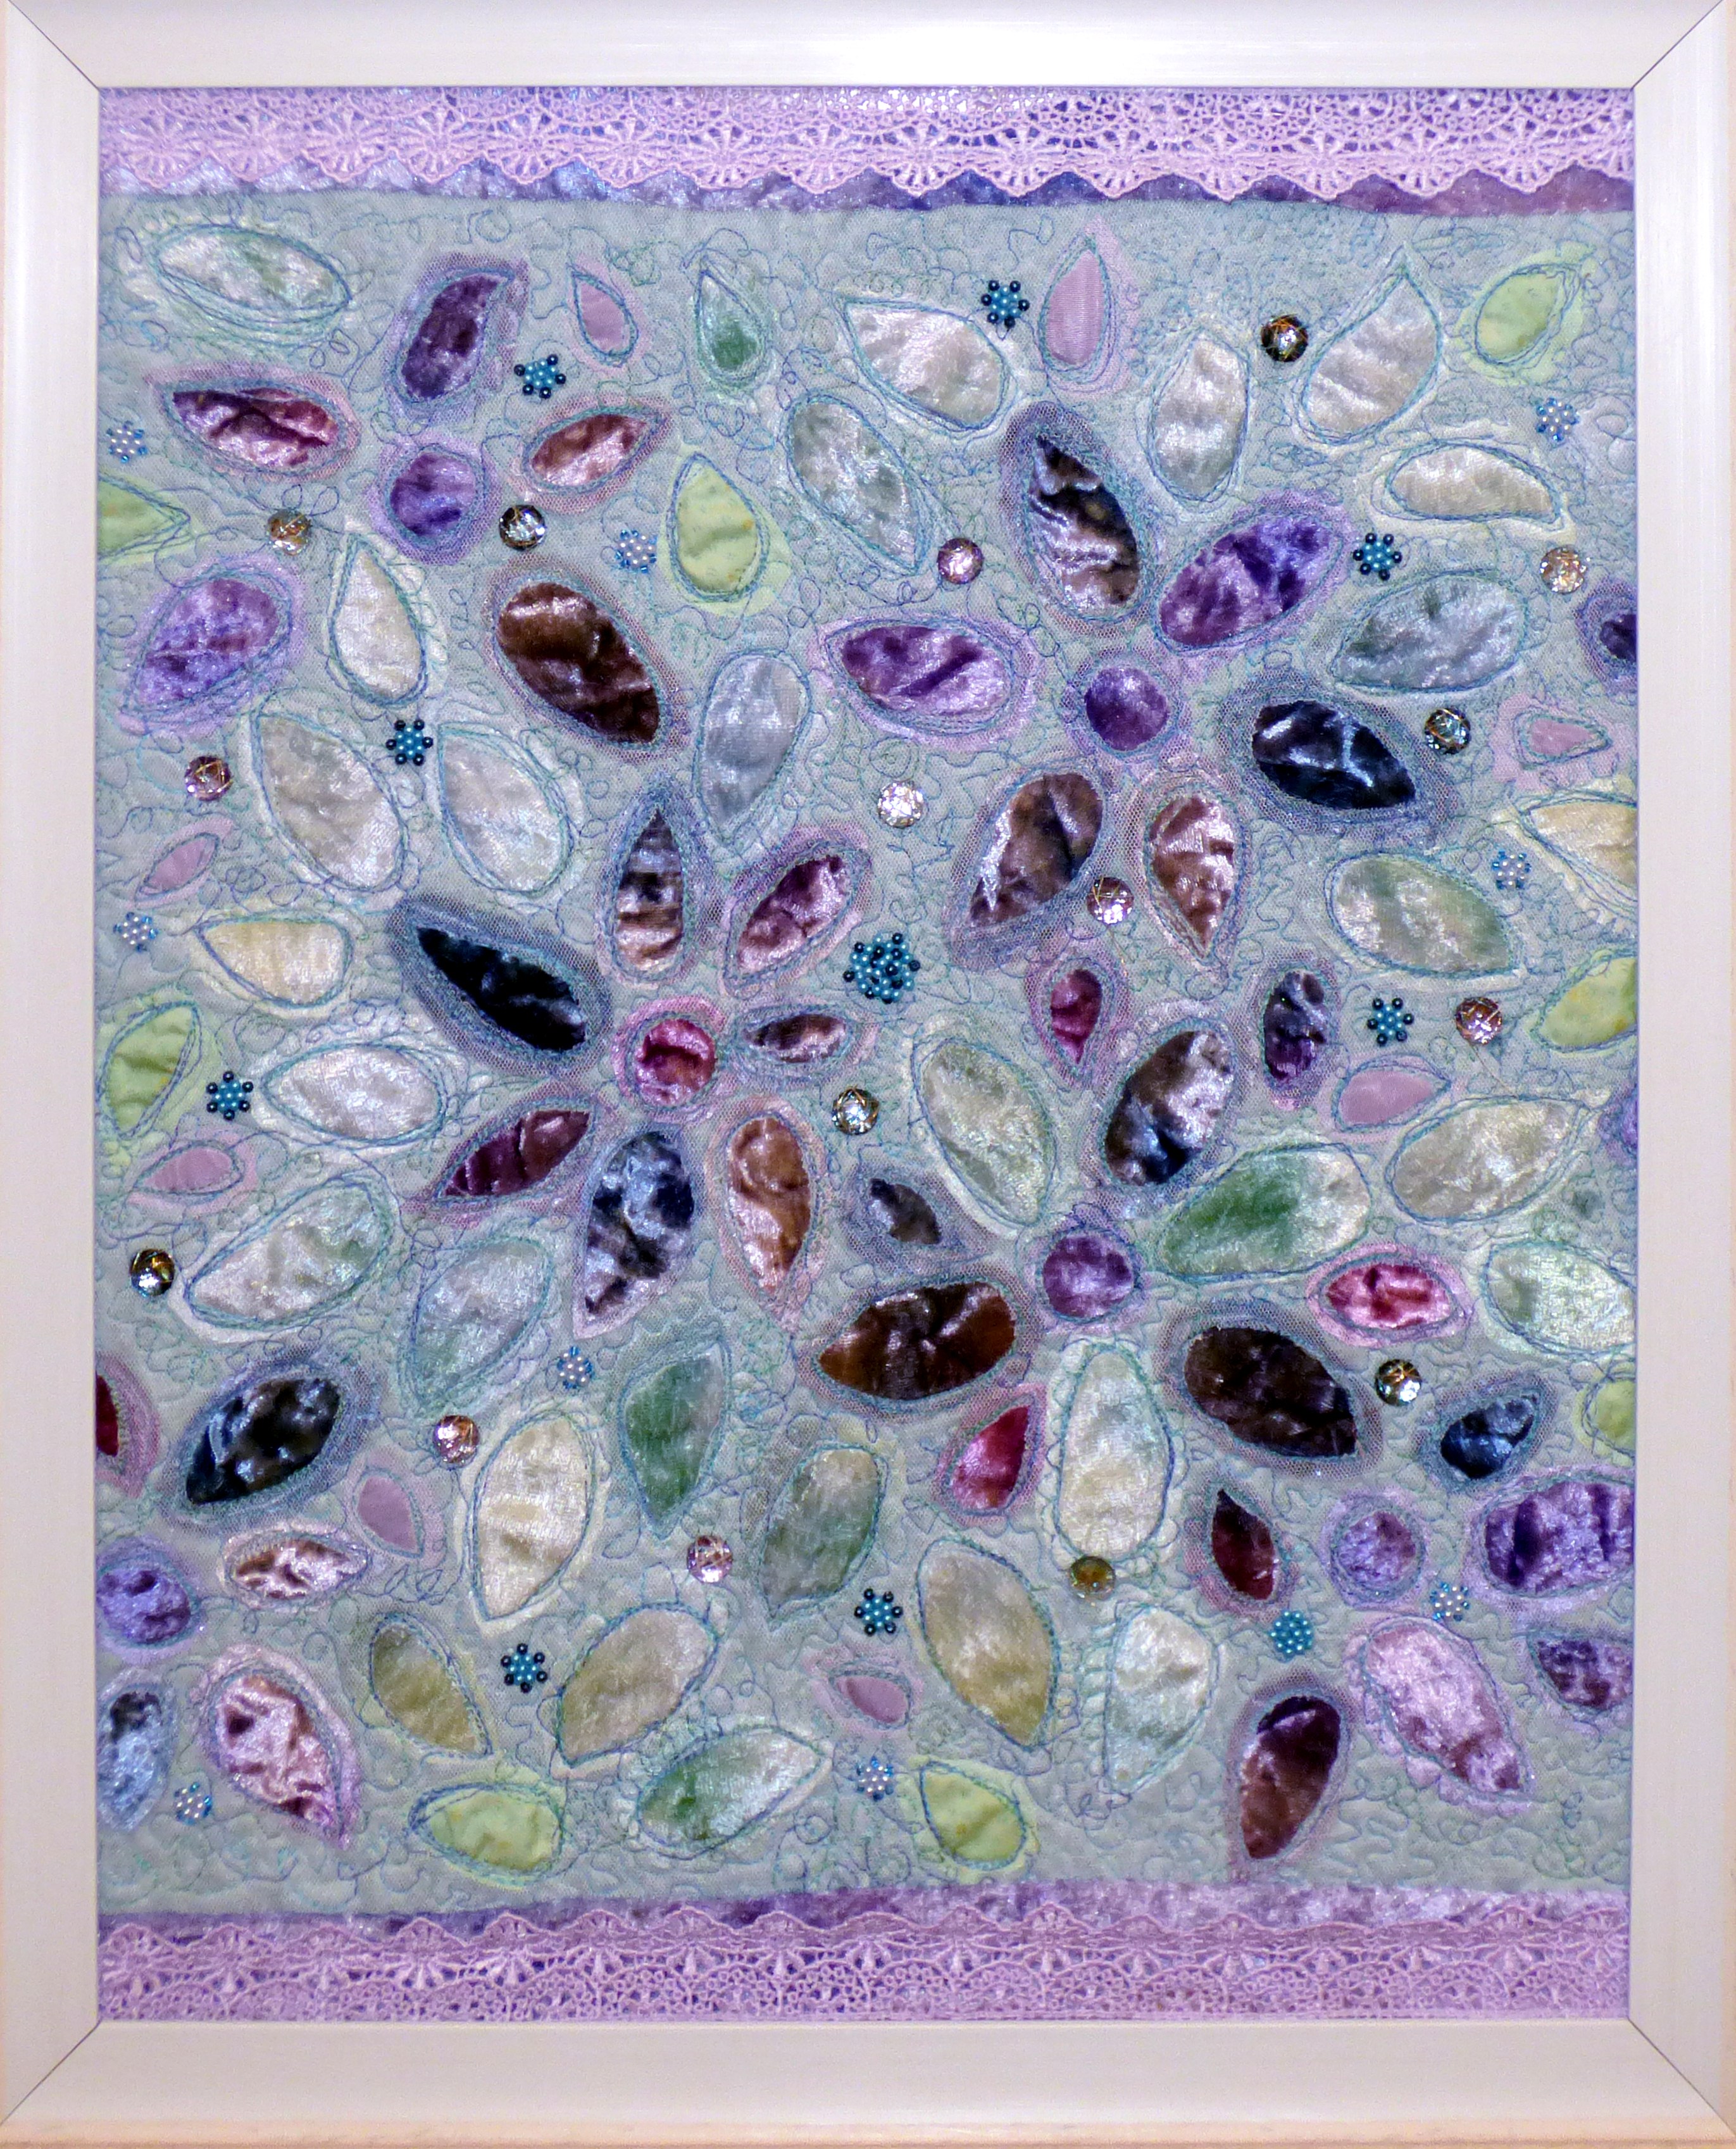 LLEAF ME ALONE" by Dary McPeake, transfer dyed fabric with machine stitching